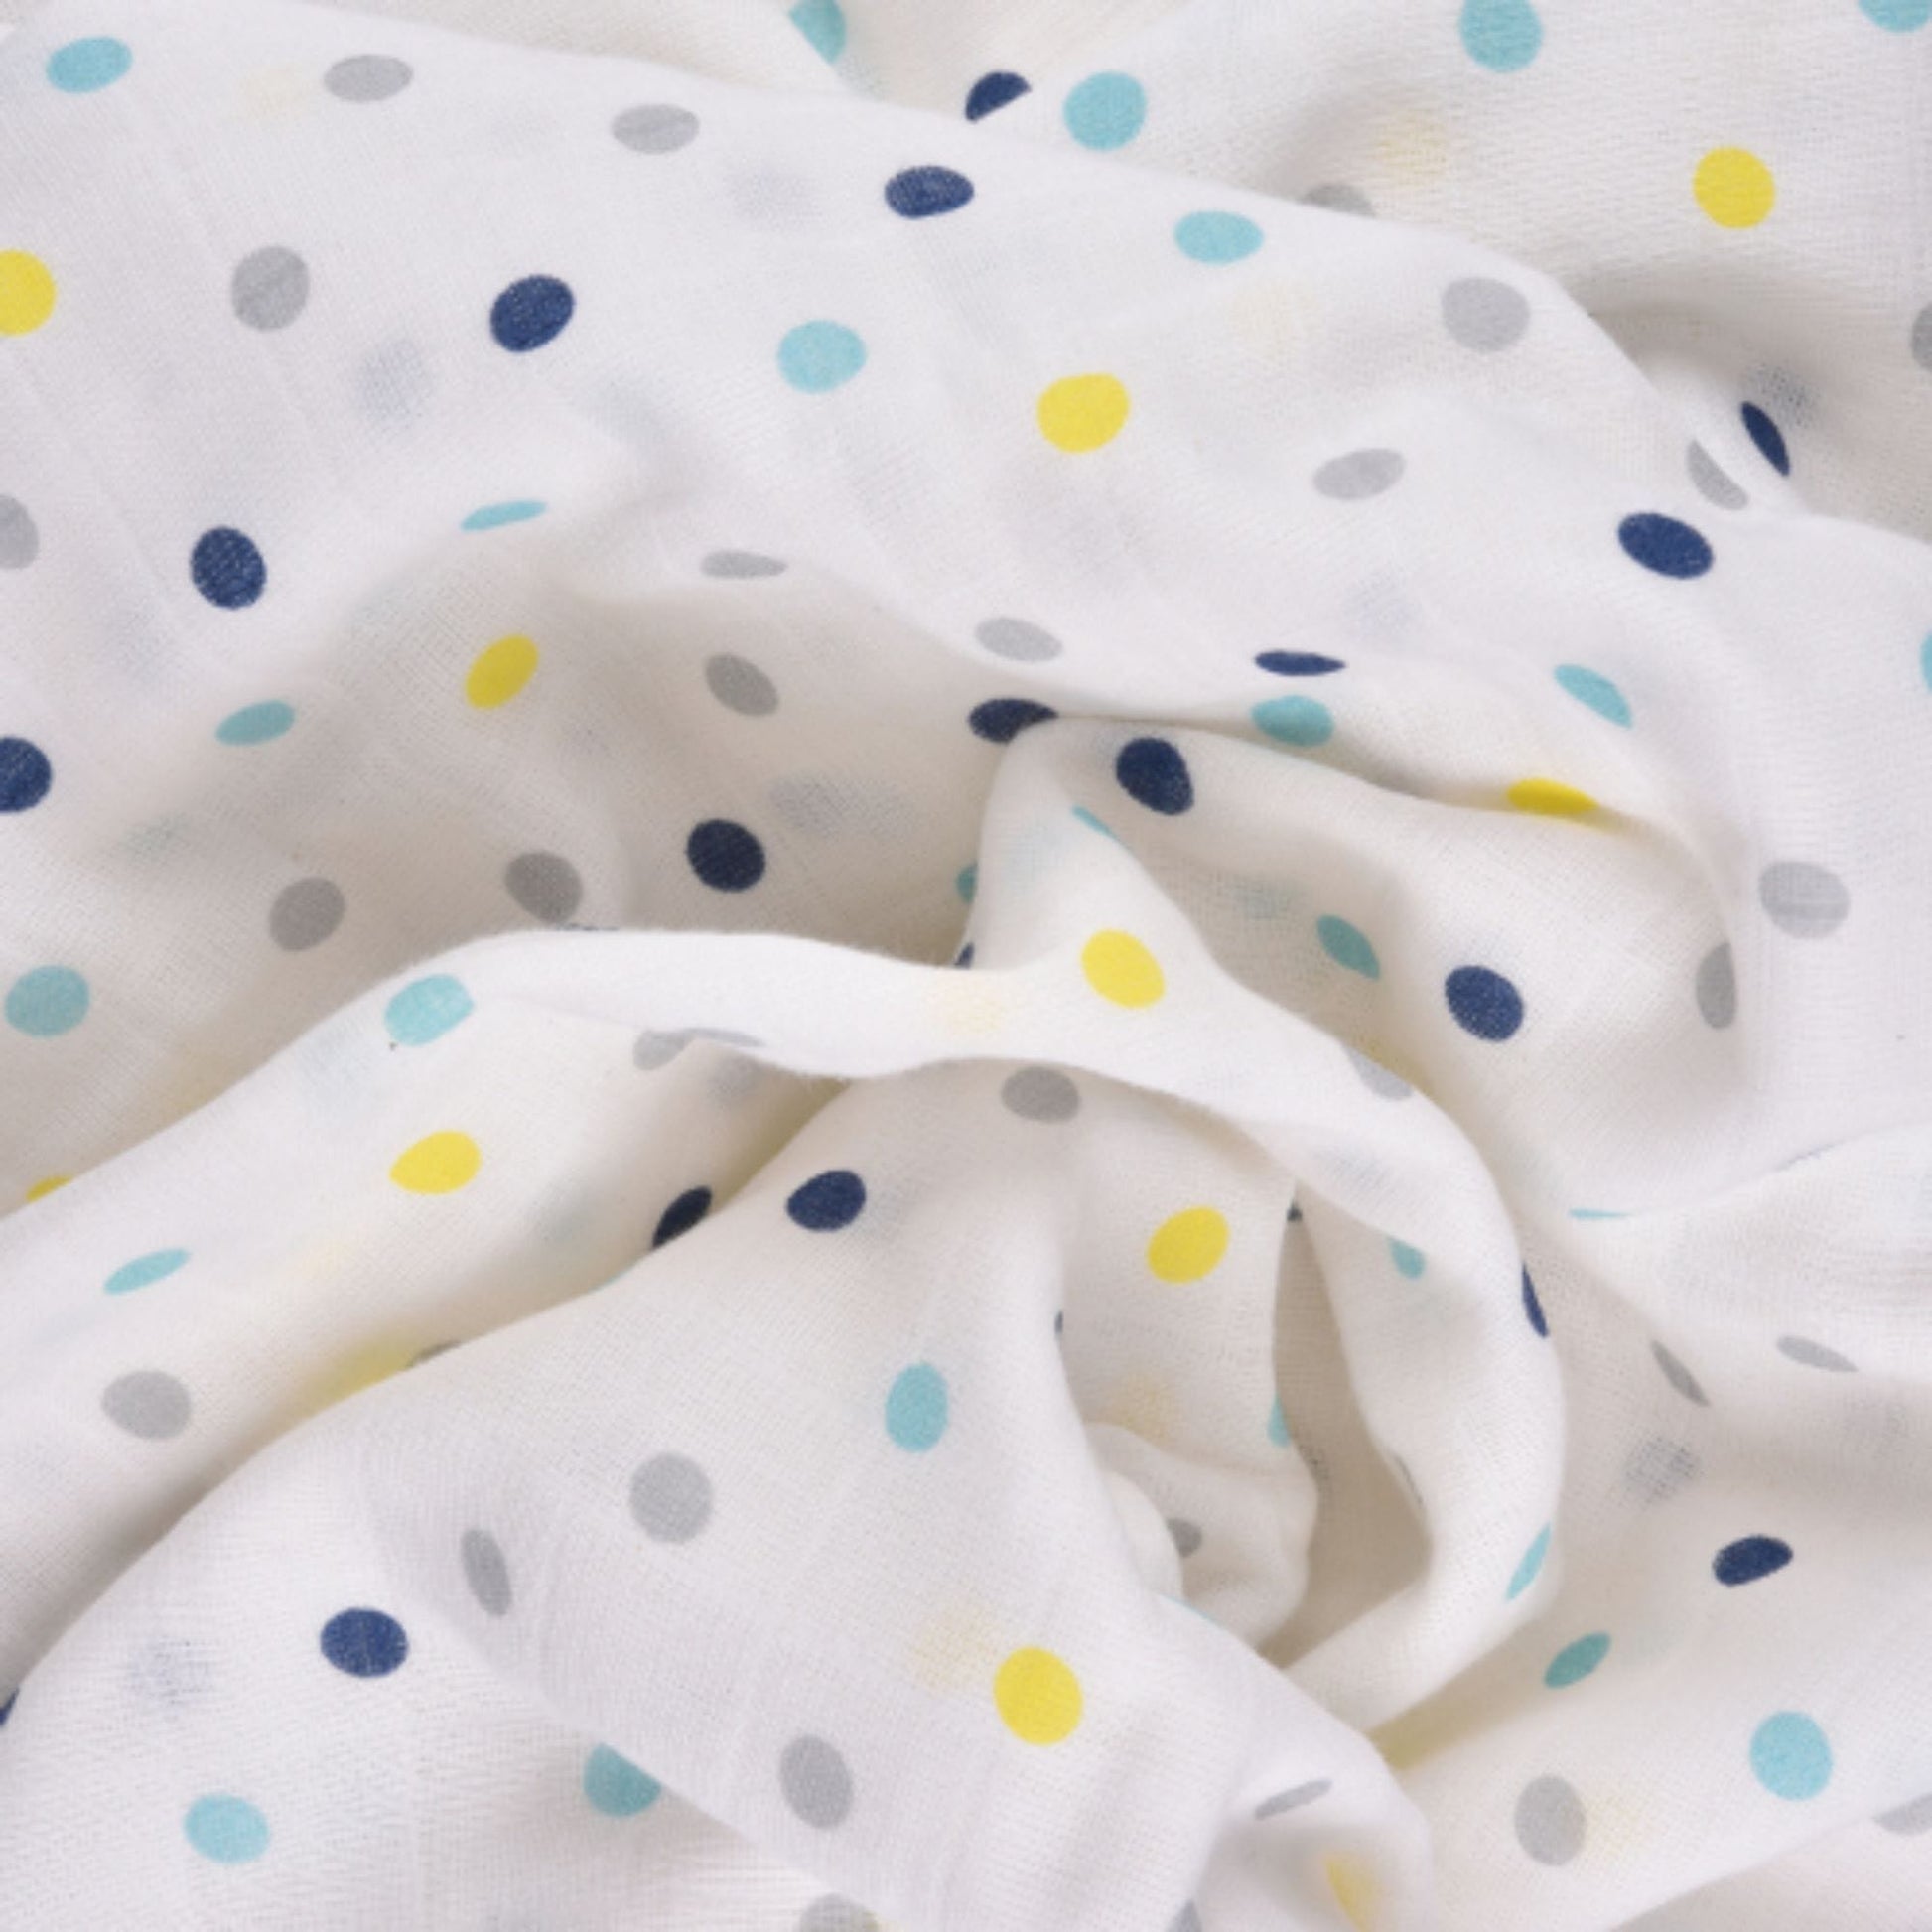 Chevron Stripes 100% Cotton Muslin Swaddle Pack Of 5 (Navy, Star Navy, Dots, Anchor, Horse) 100 x 100 CM - haus & kinder